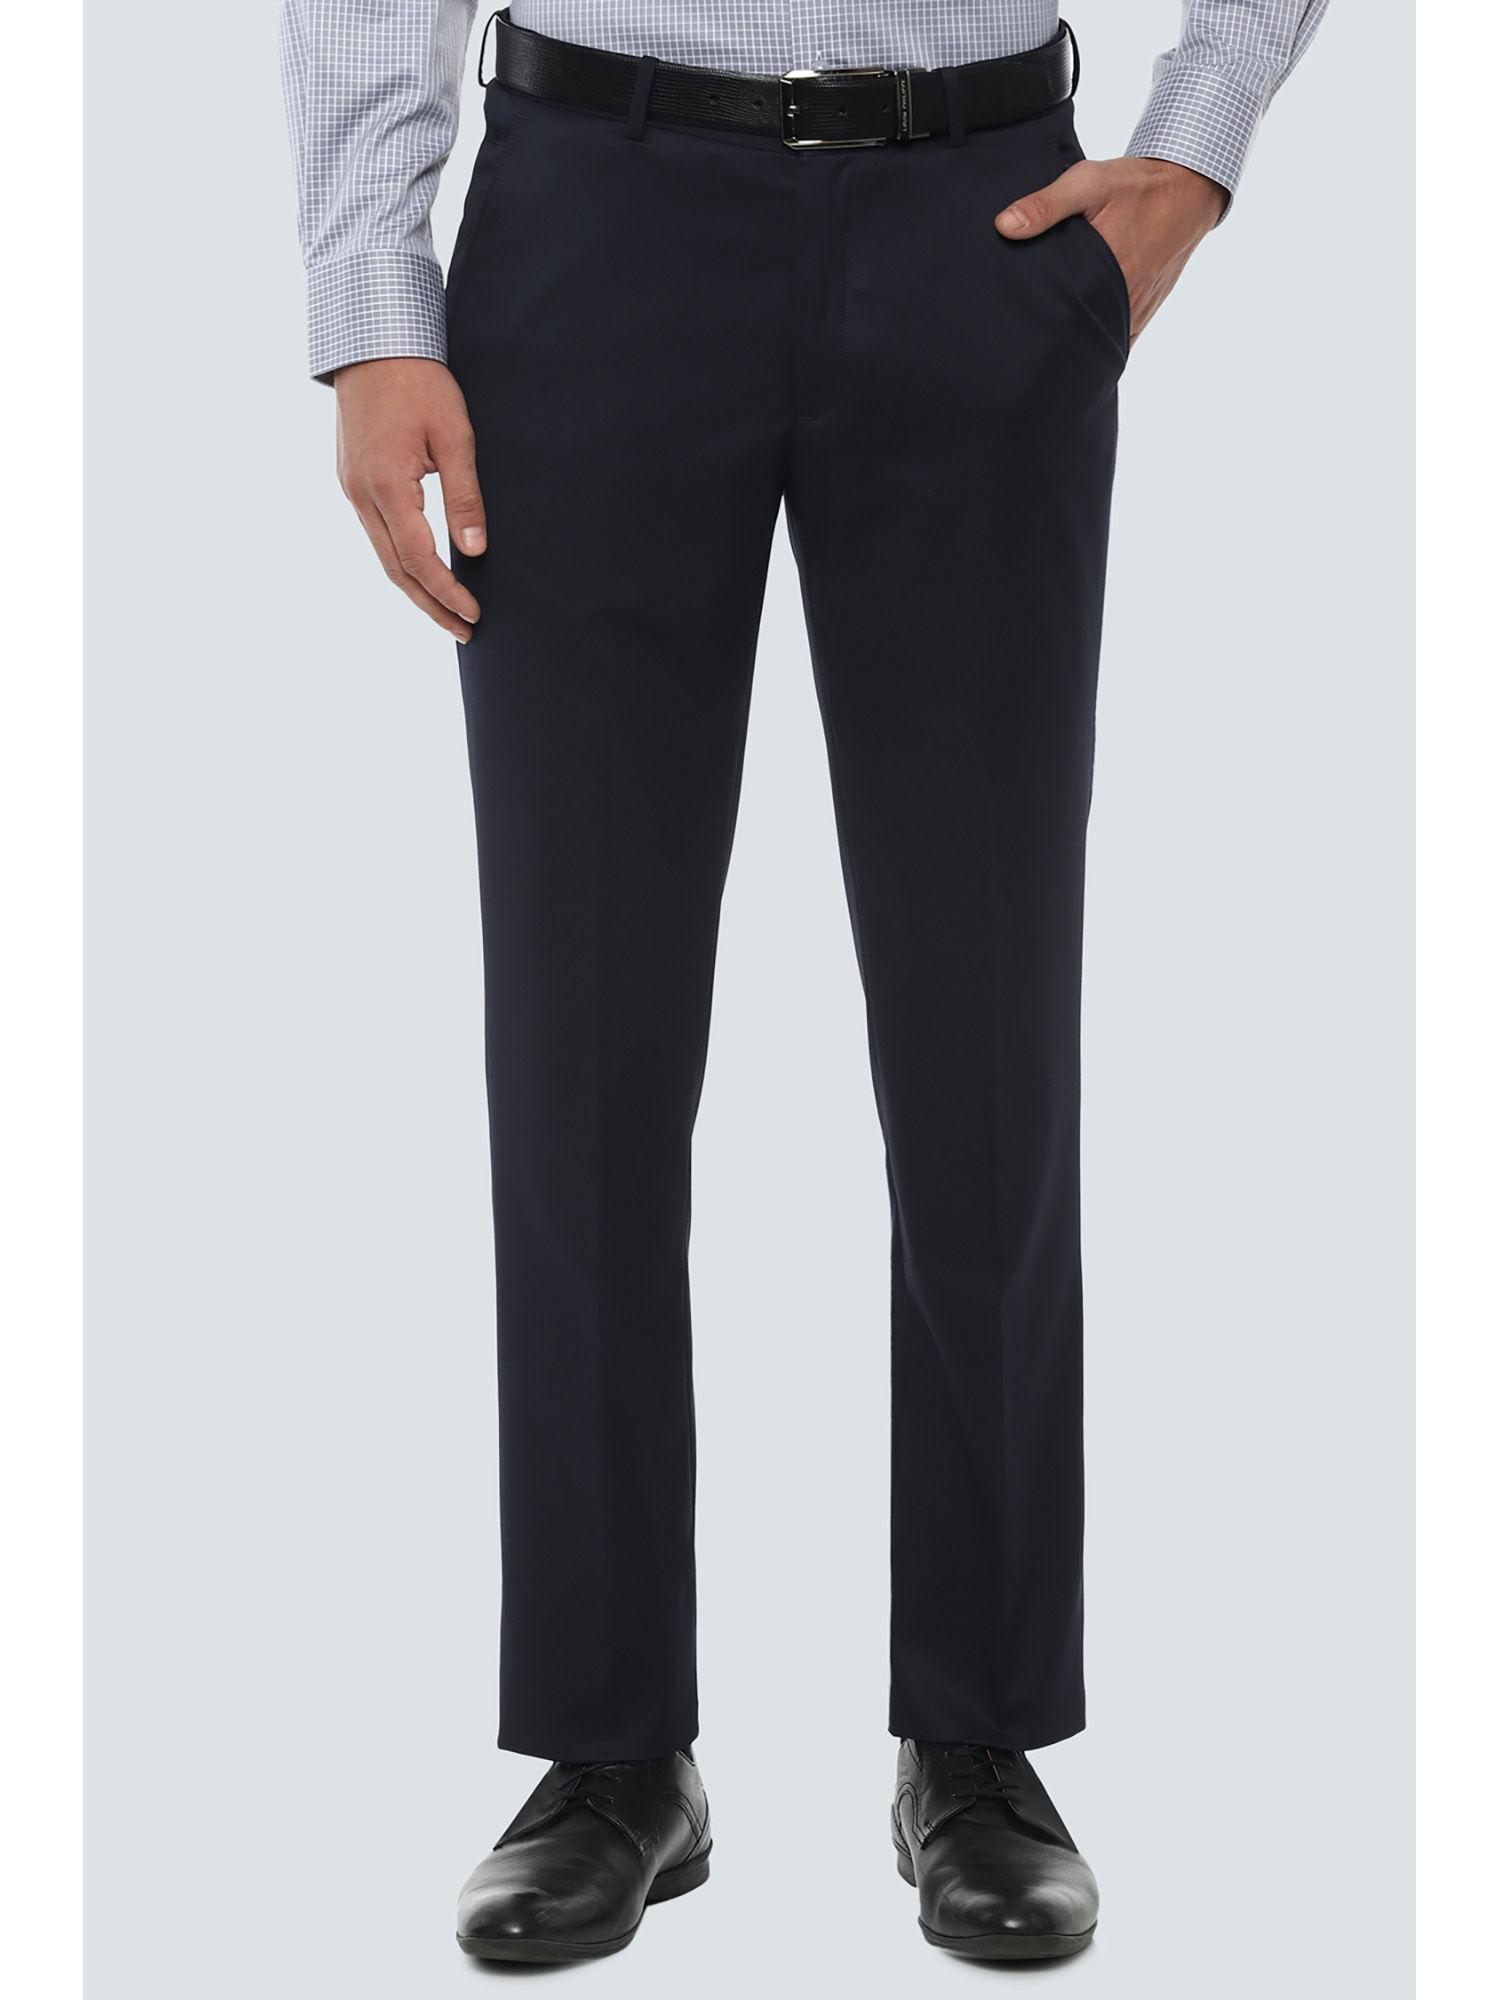 navy trousers